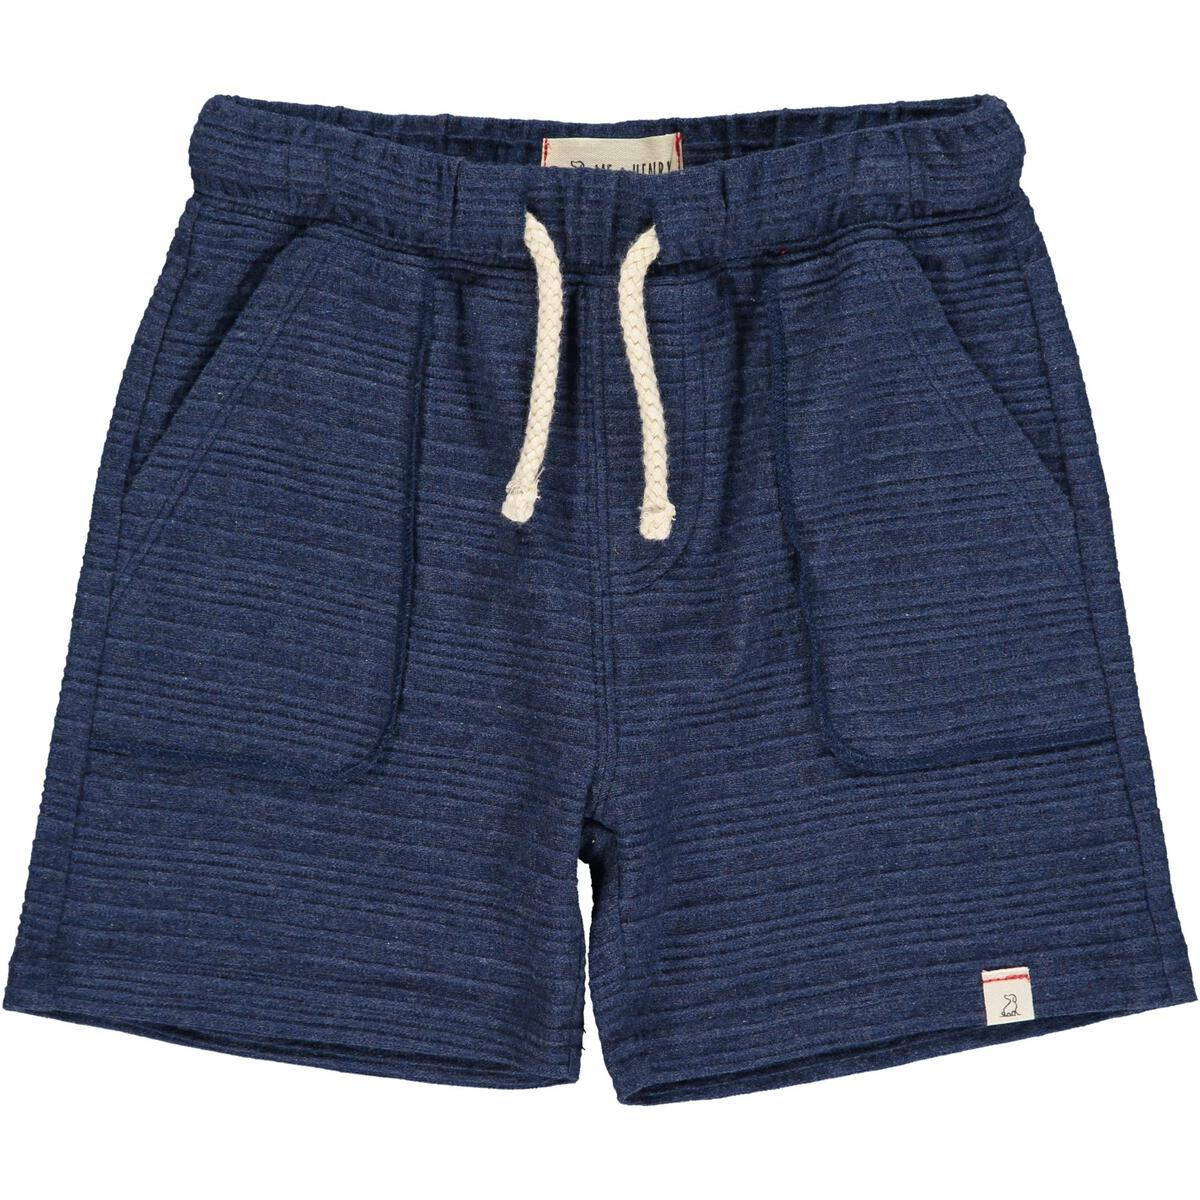 Me & Henry - Bluepeter Shorts - Navy Ribbed